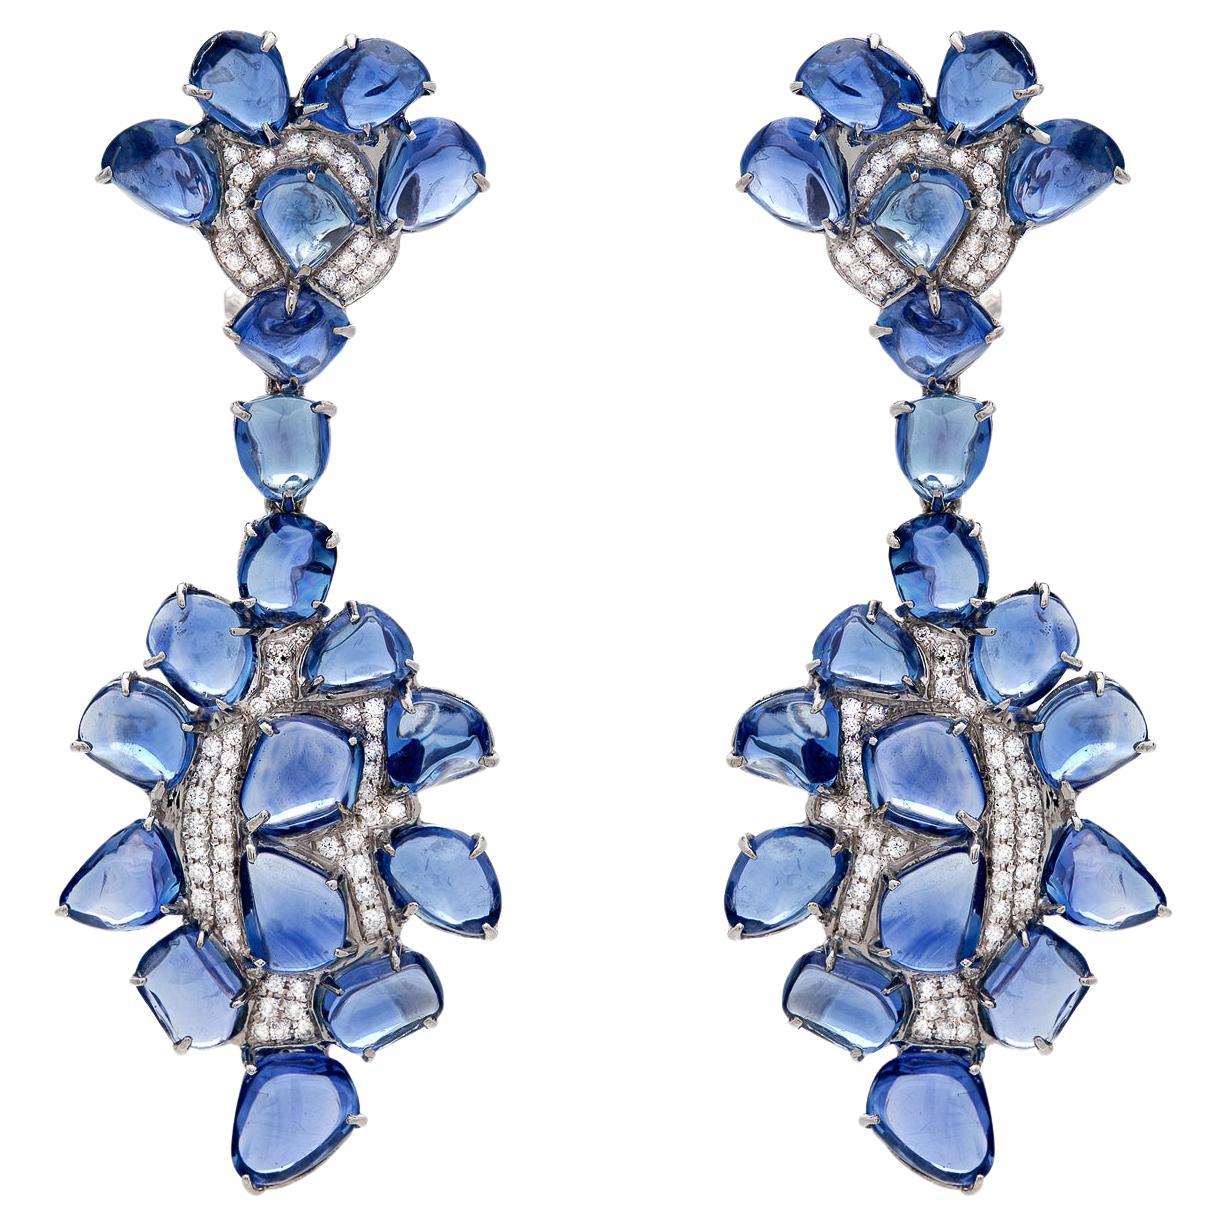 RUCHI Blue Sapphire and Pavé Diamond White Gold Statement Drop Earrings